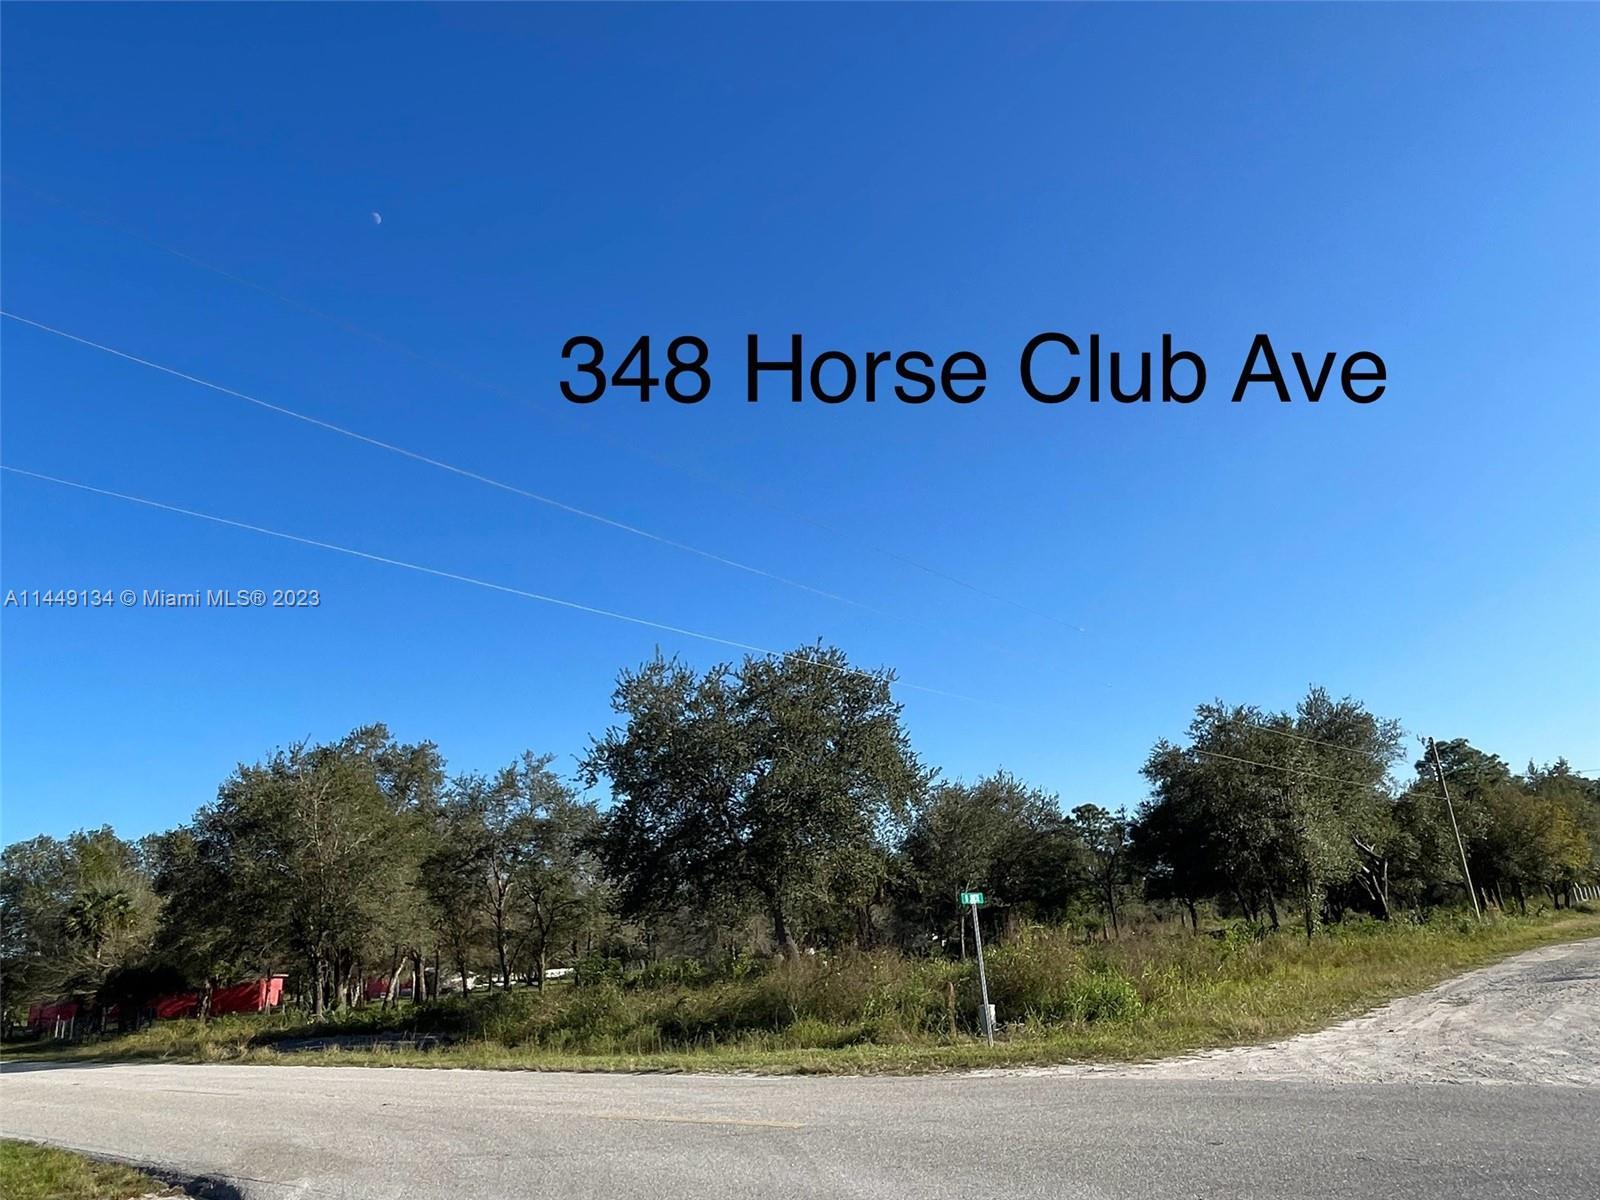 Photo of 348 Horse Club Ave in Clewiston, FL